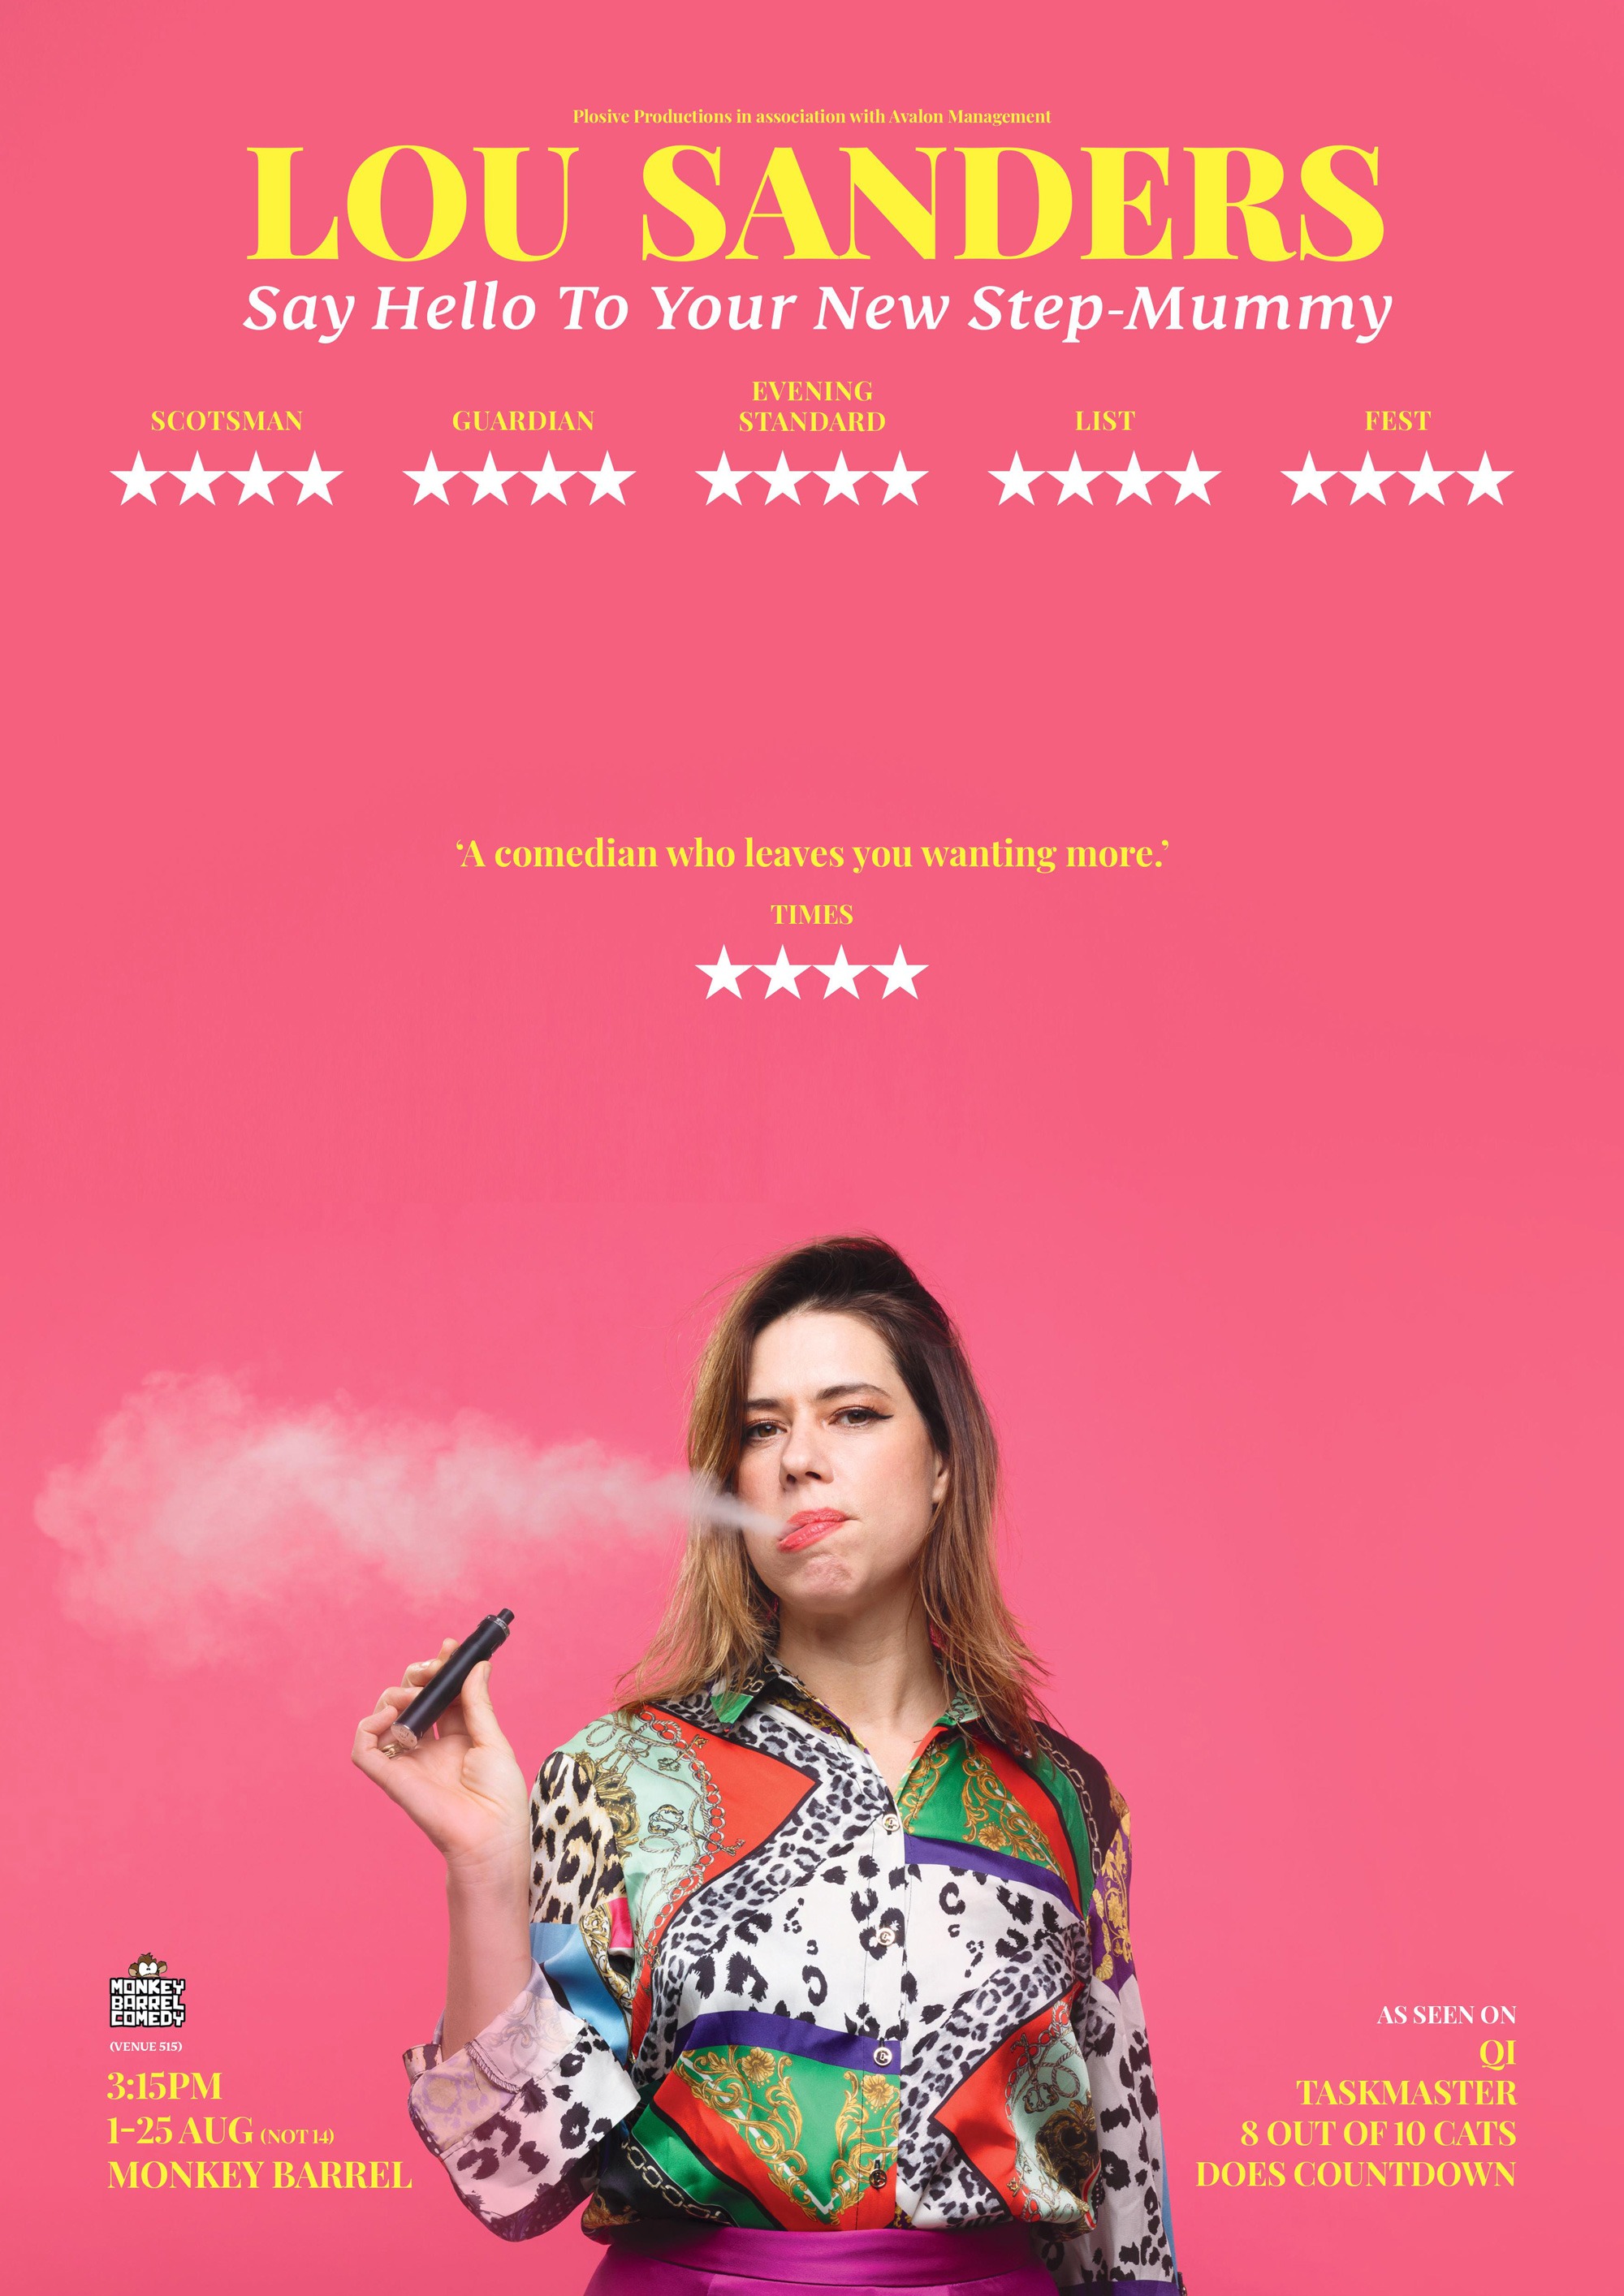 The poster for Lou Sanders: Say Hello To Your New Step-Mummy